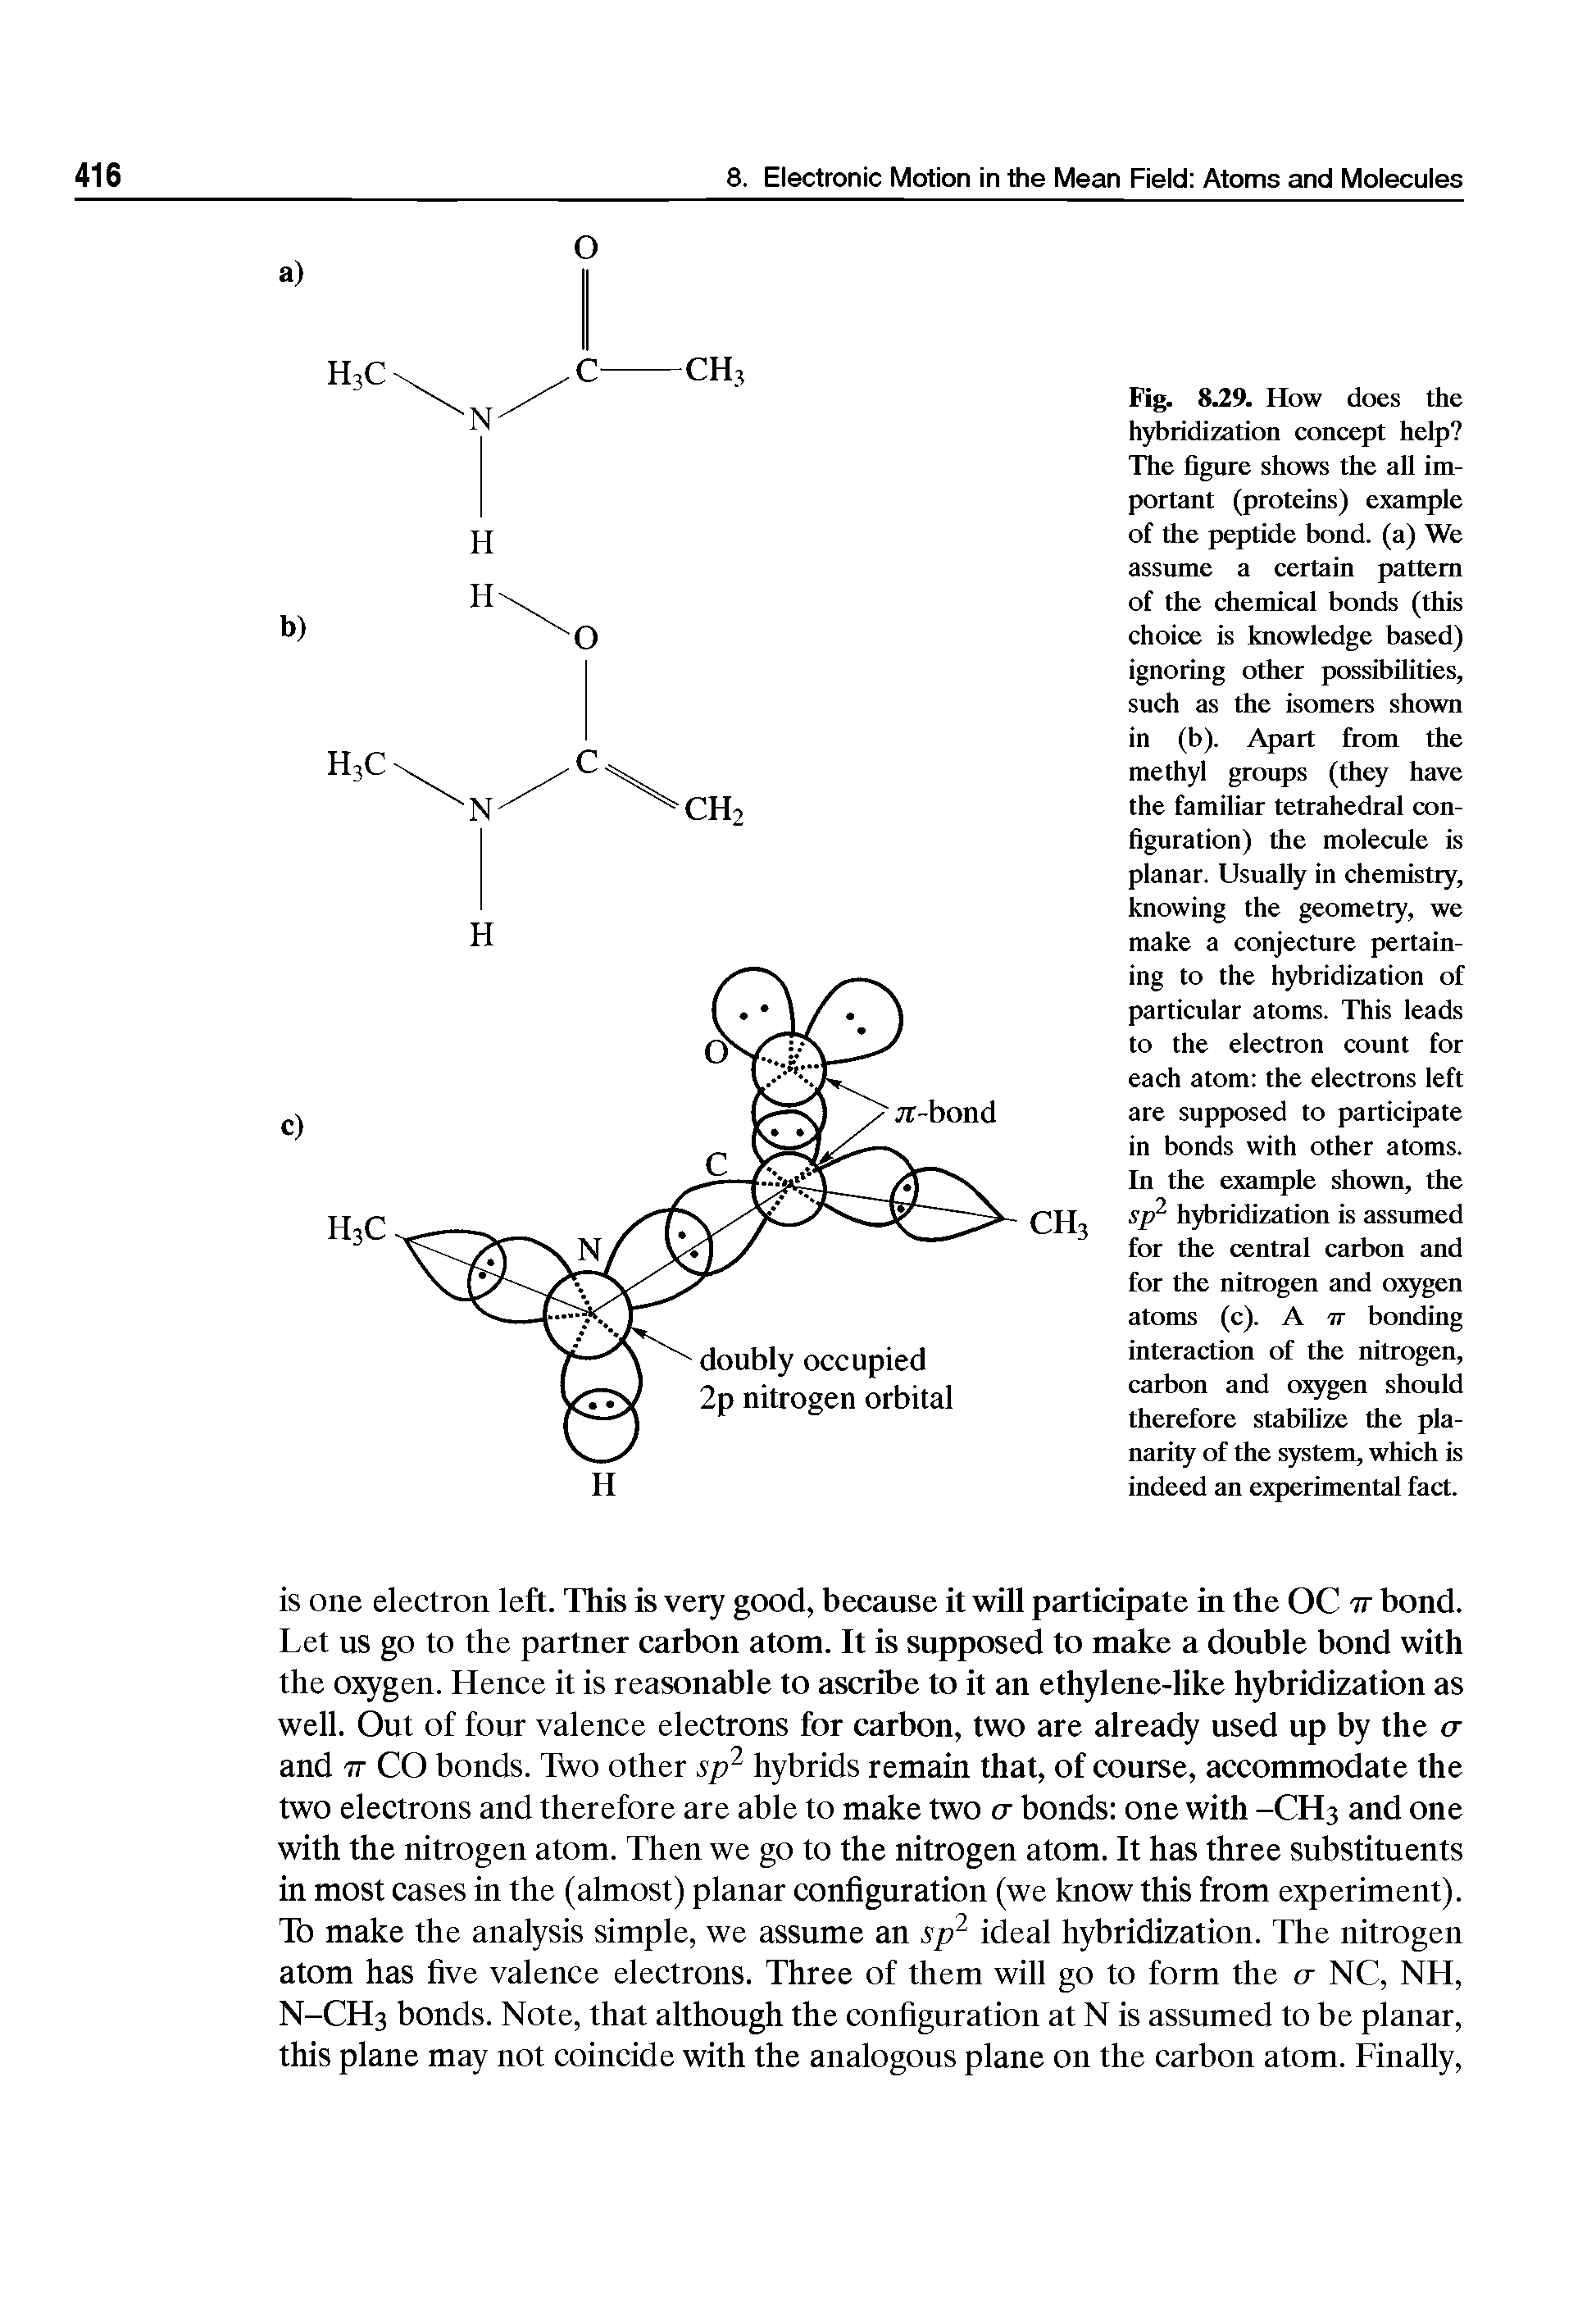 Fig. 8.29. How does the hybridization concept help The figure shows the all important (proteins) example of the peptide bond, (a) We assume a certain pattern of the chemical bonds (this choice is knowledge based) ignoring other possibilities, such as the isomers shown in (b). Apart from the methyl groups (they have the familiar tetrahedral configuration) the molecule is planar. Usually in chemistry, knowing the geometry, we make a conjecture pertaining to the hybridization of particular atoms. This leads to the electron count for each atom the electrons left are supposed to participate in bonds with other atoms. In the example shown, the sjp hybridization is assumed for the central carbon and for the nitrogen and o gen atoms (c). A ir bonding interaction of the nitrogen, carbon and o gen should therefore stabilize the planarity of the system, which is indeed an experimental fact.